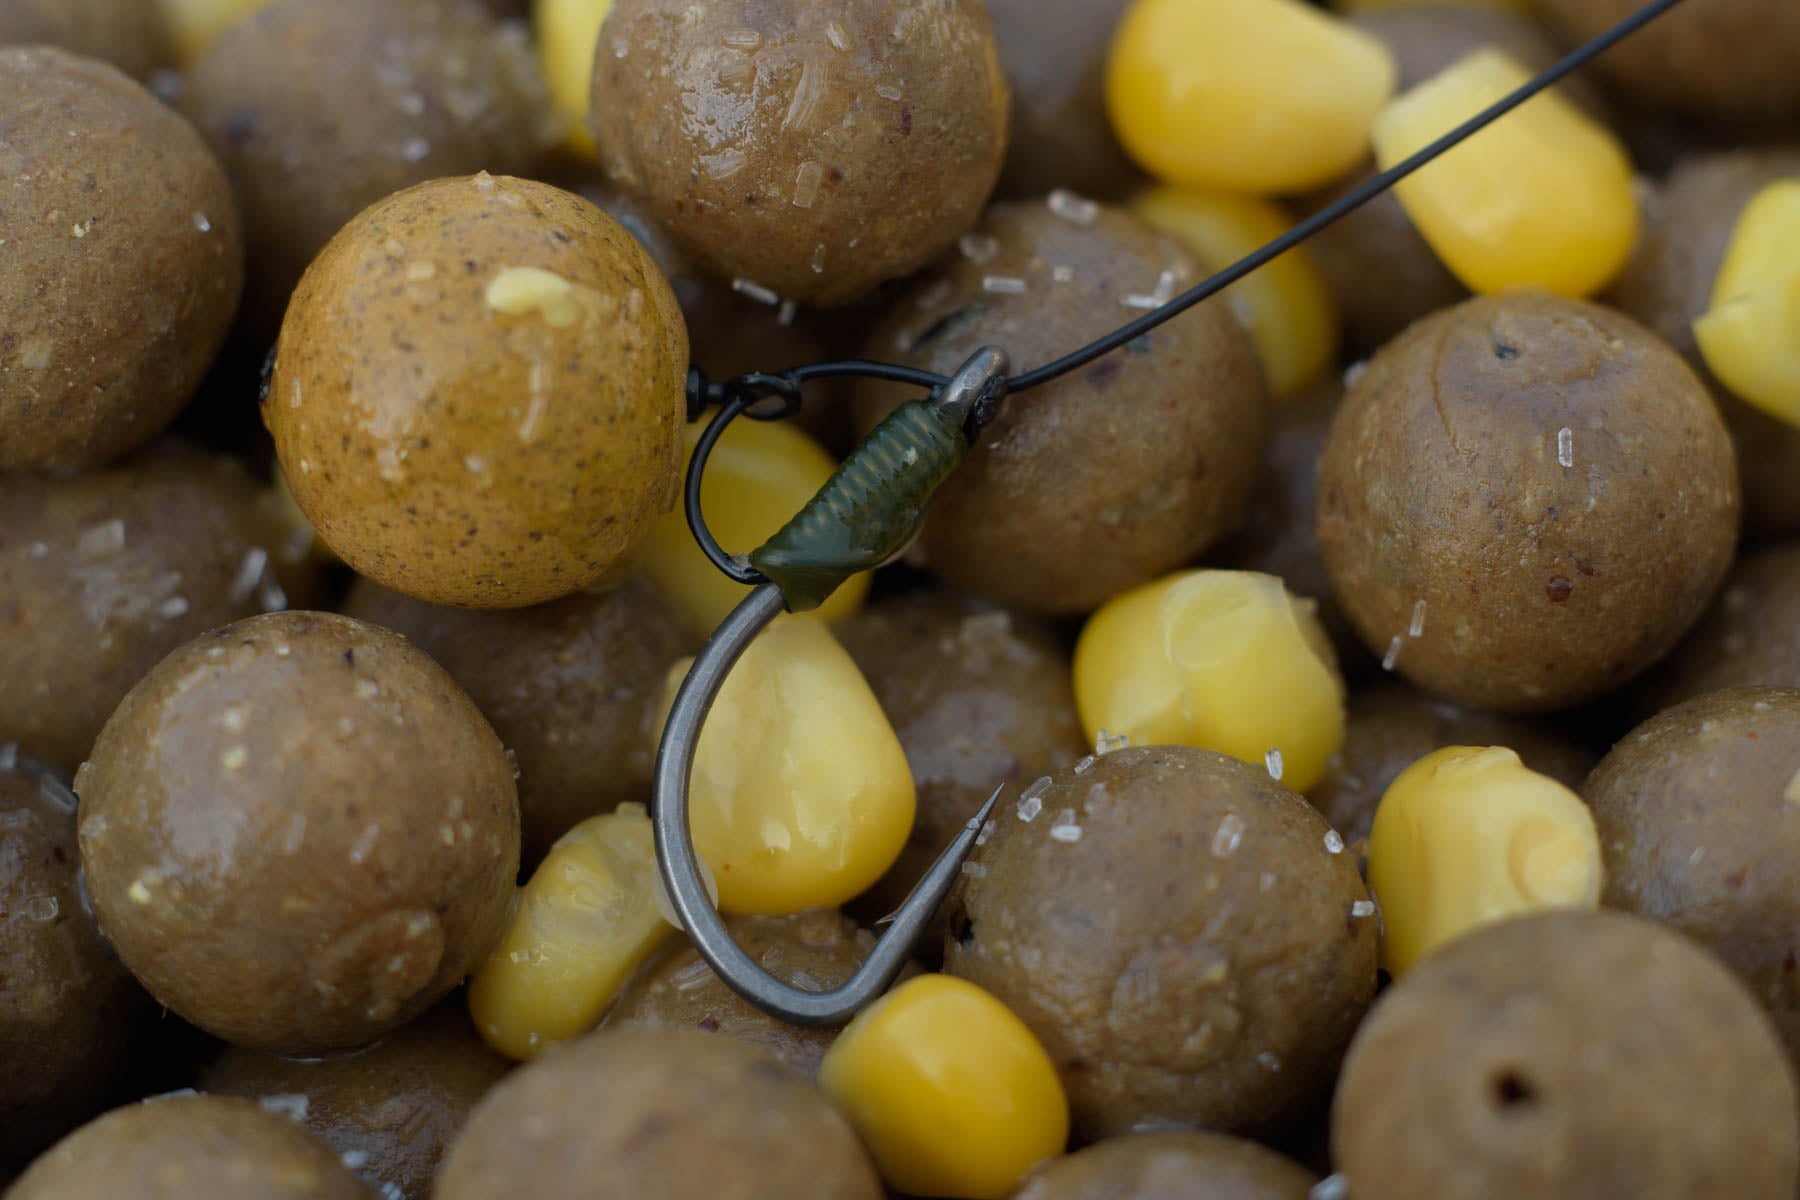 Carp Fishing Rigs - A guide to carp rigs by Angling Iron